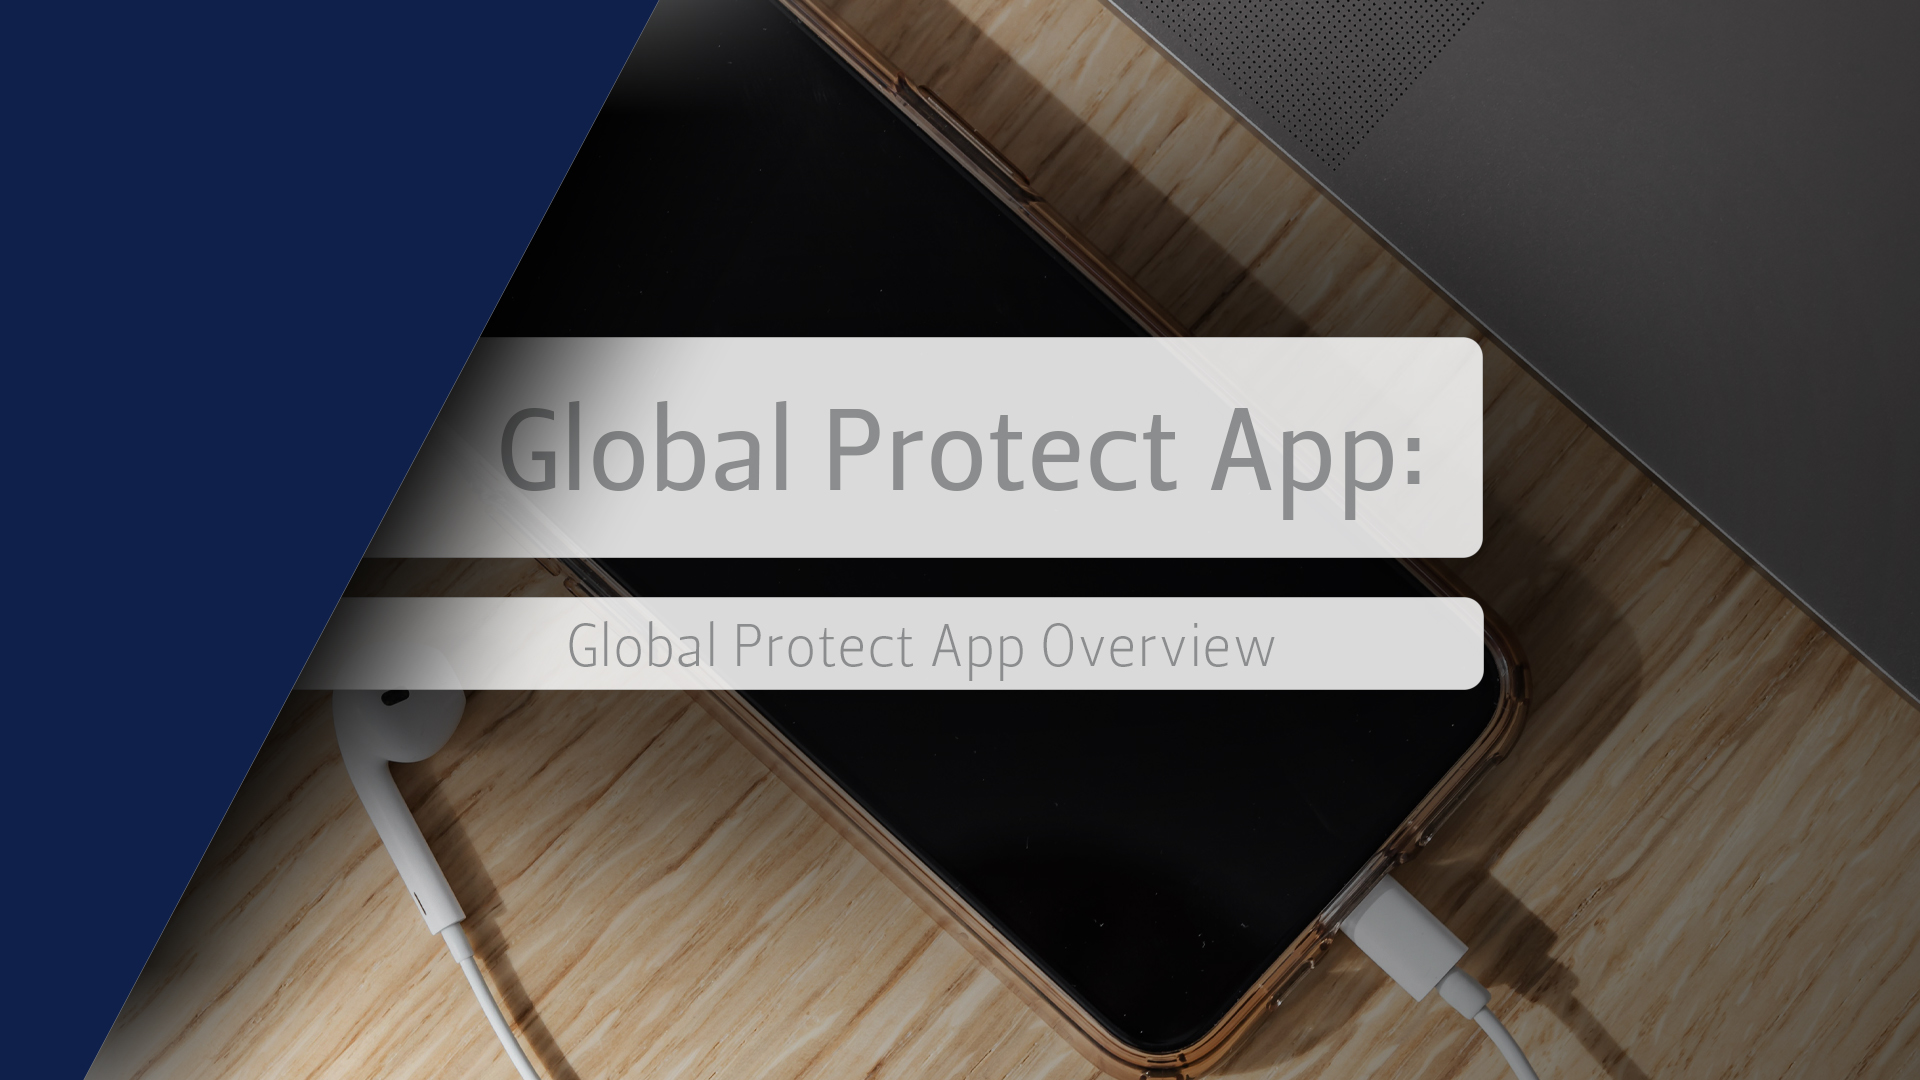 Global Protect App Overview